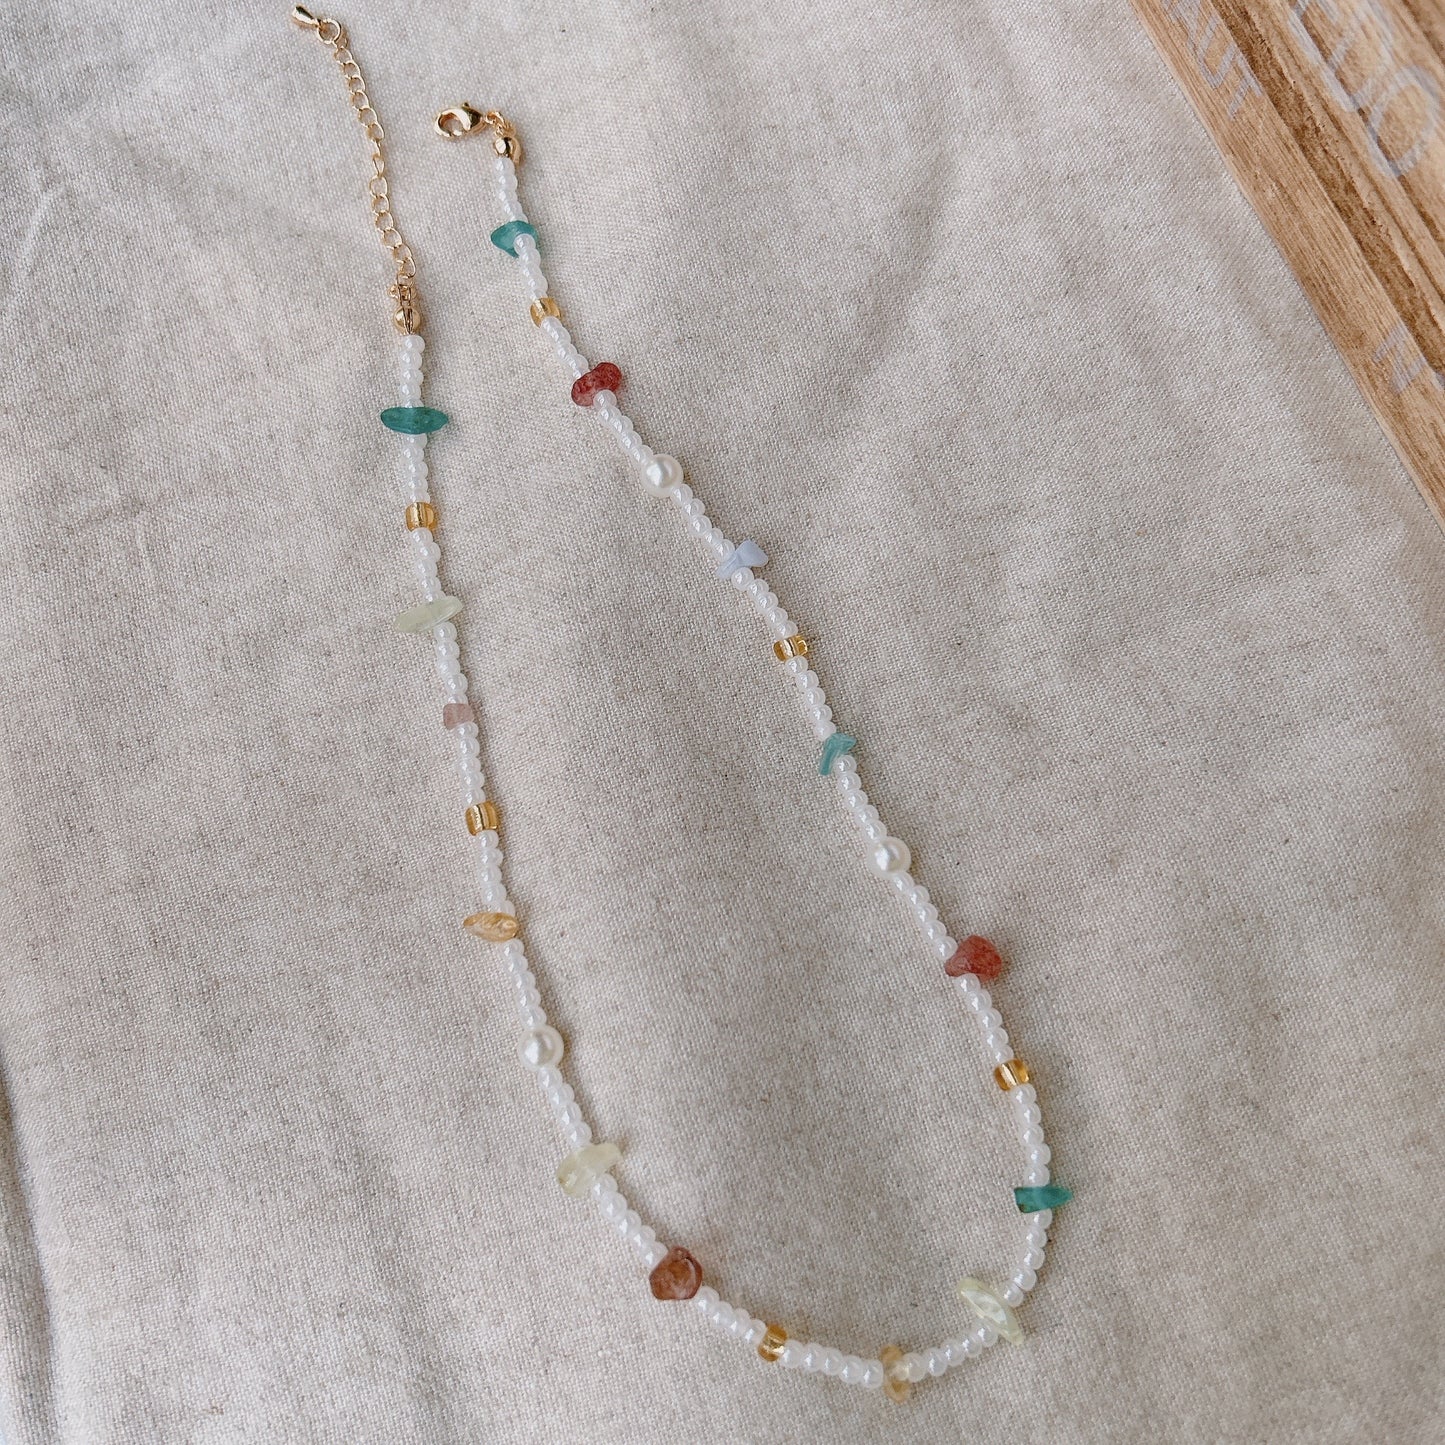 Paige Crystal Beaded Necklace